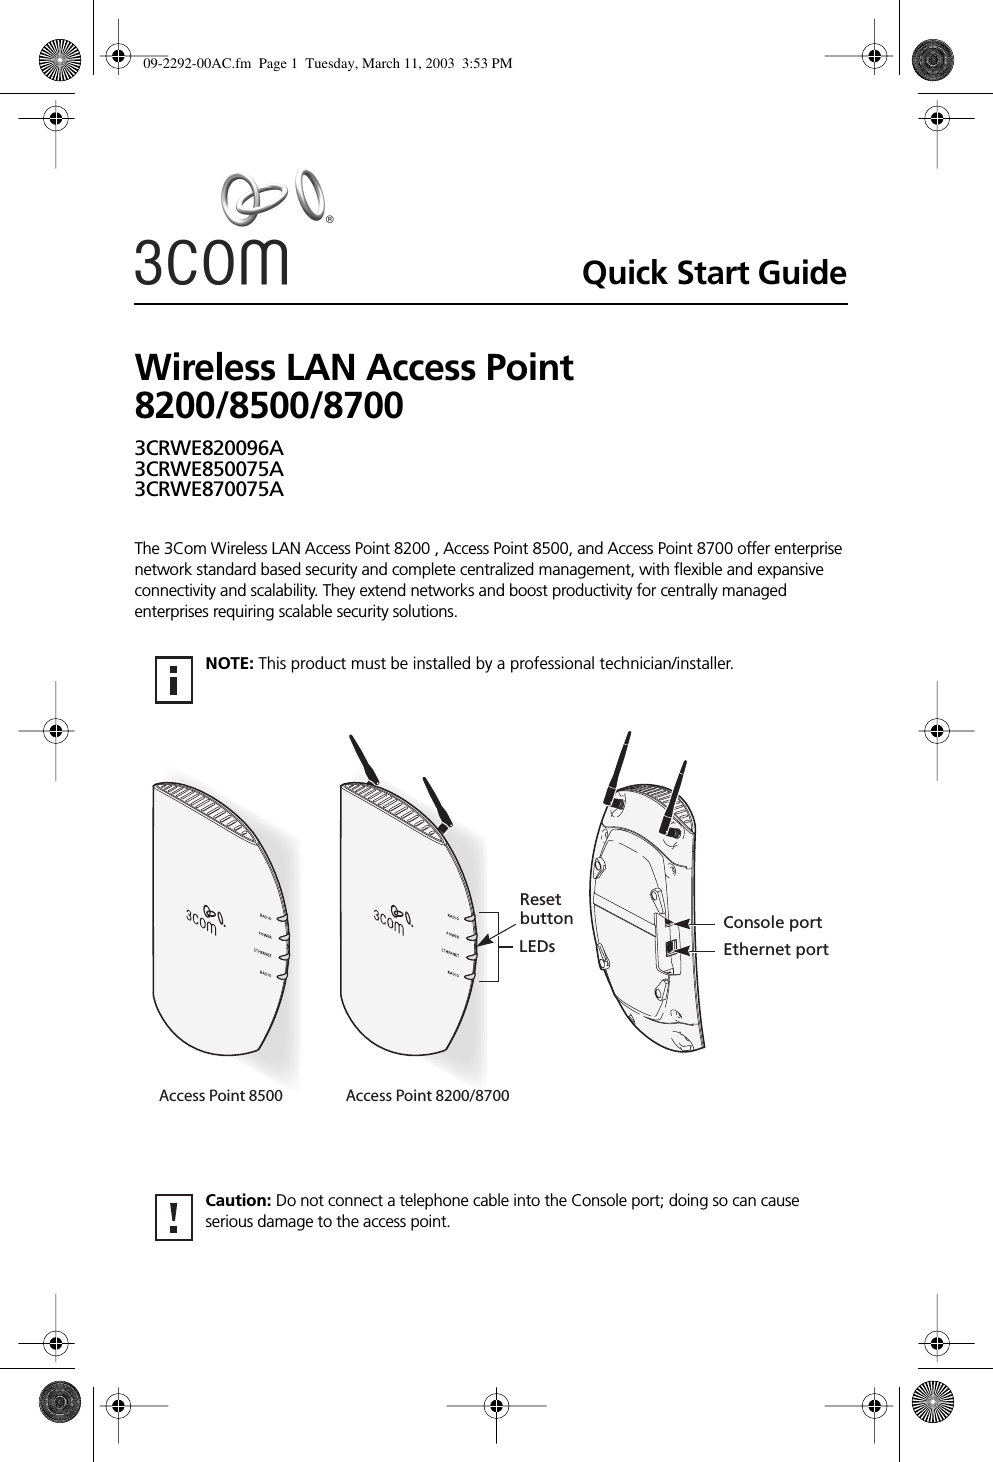  Quick Start Guide Wireless LAN Access Point 8200/8500/8700 3CRWE820096A3CRWE850075A3CRWE870075A The 3Com Wireless LAN Access Point 8200 , Access Point 8500, and Access Point 8700 offer enterprise network standard based security and complete centralized management, with ﬂexible and expansive connectivity and scalability. They extend networks and boost productivity for centrally managed enterprises requiring scalable security solutions.  NOTE:  This product must be installed by a professional technician/installer.  Caution:  Do not connect a telephone cable into the Console port; doing so can cause serious damage to the access point.LEDsResetbutton Console portEthernet portAccess Point 8500 Access Point 8200/8700 09-2292-00AC.fm  Page 1  Tuesday, March 11, 2003  3:53 PM